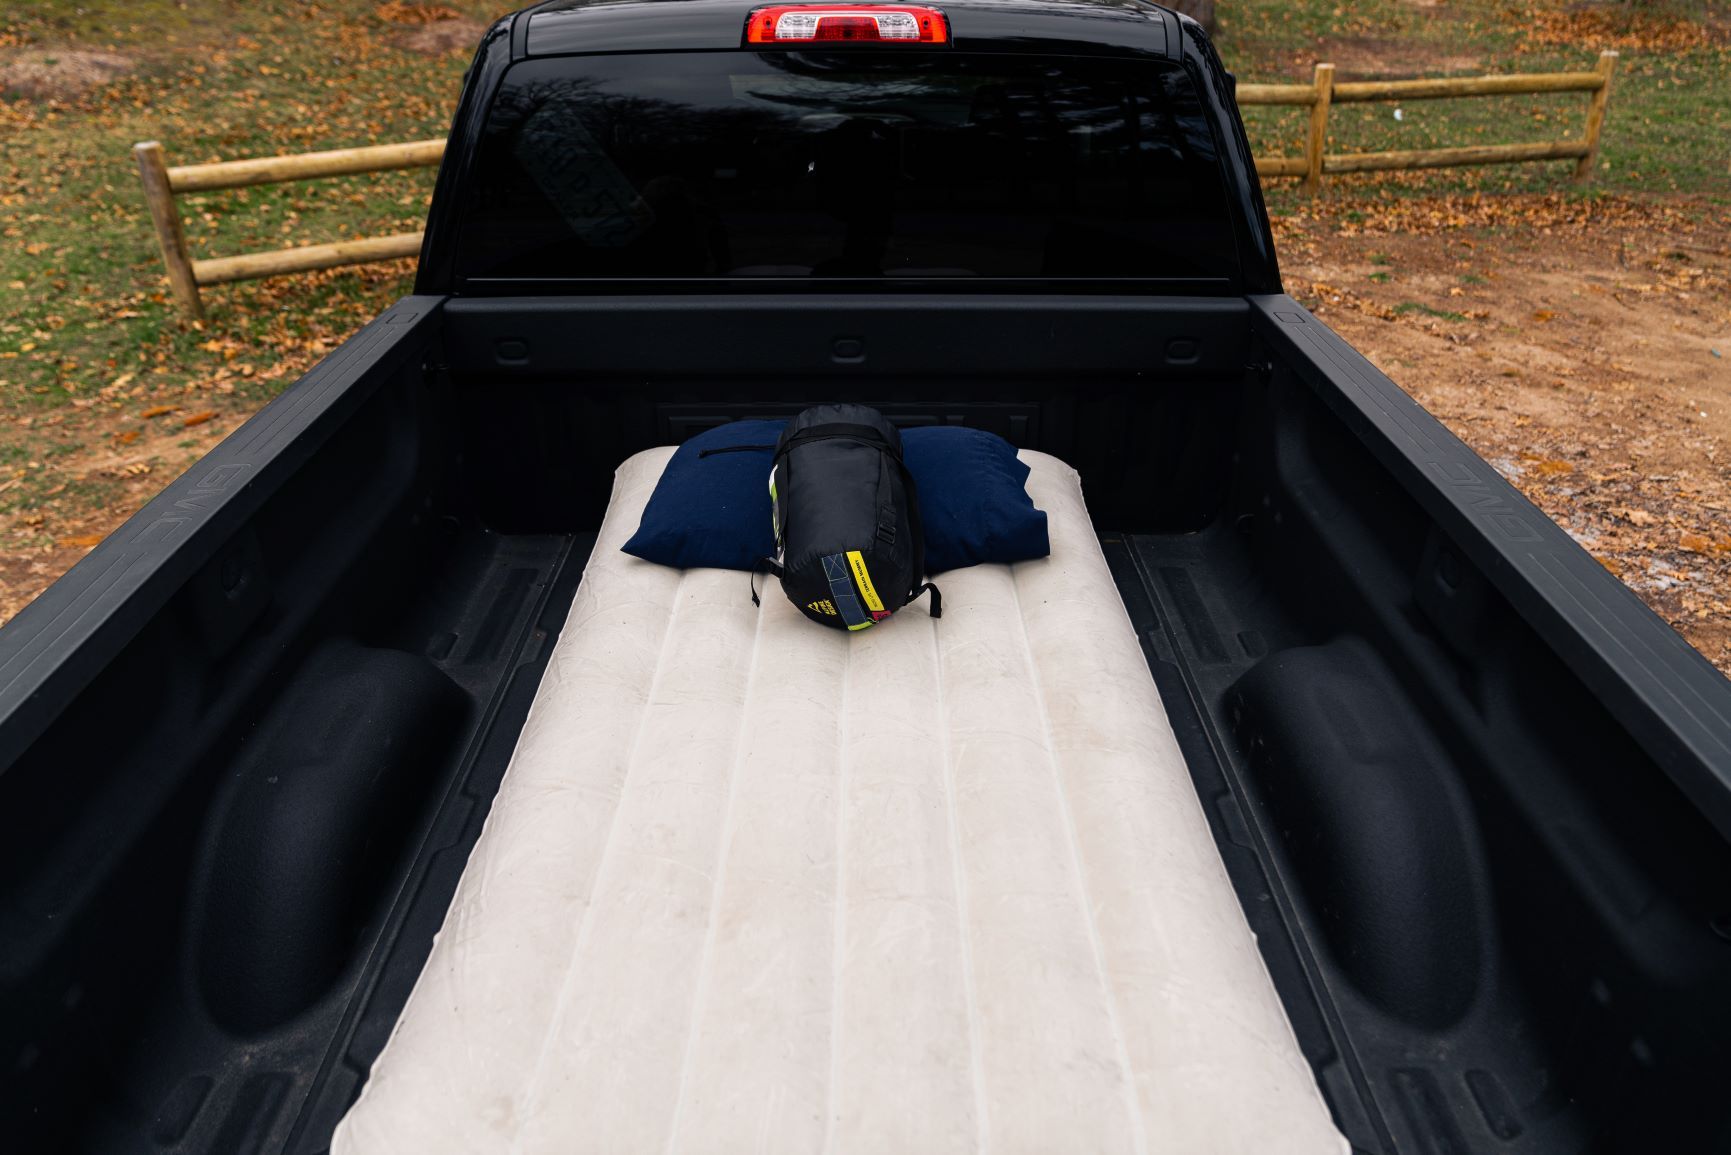 What Size Of Mattress Fits In A Truck Bed